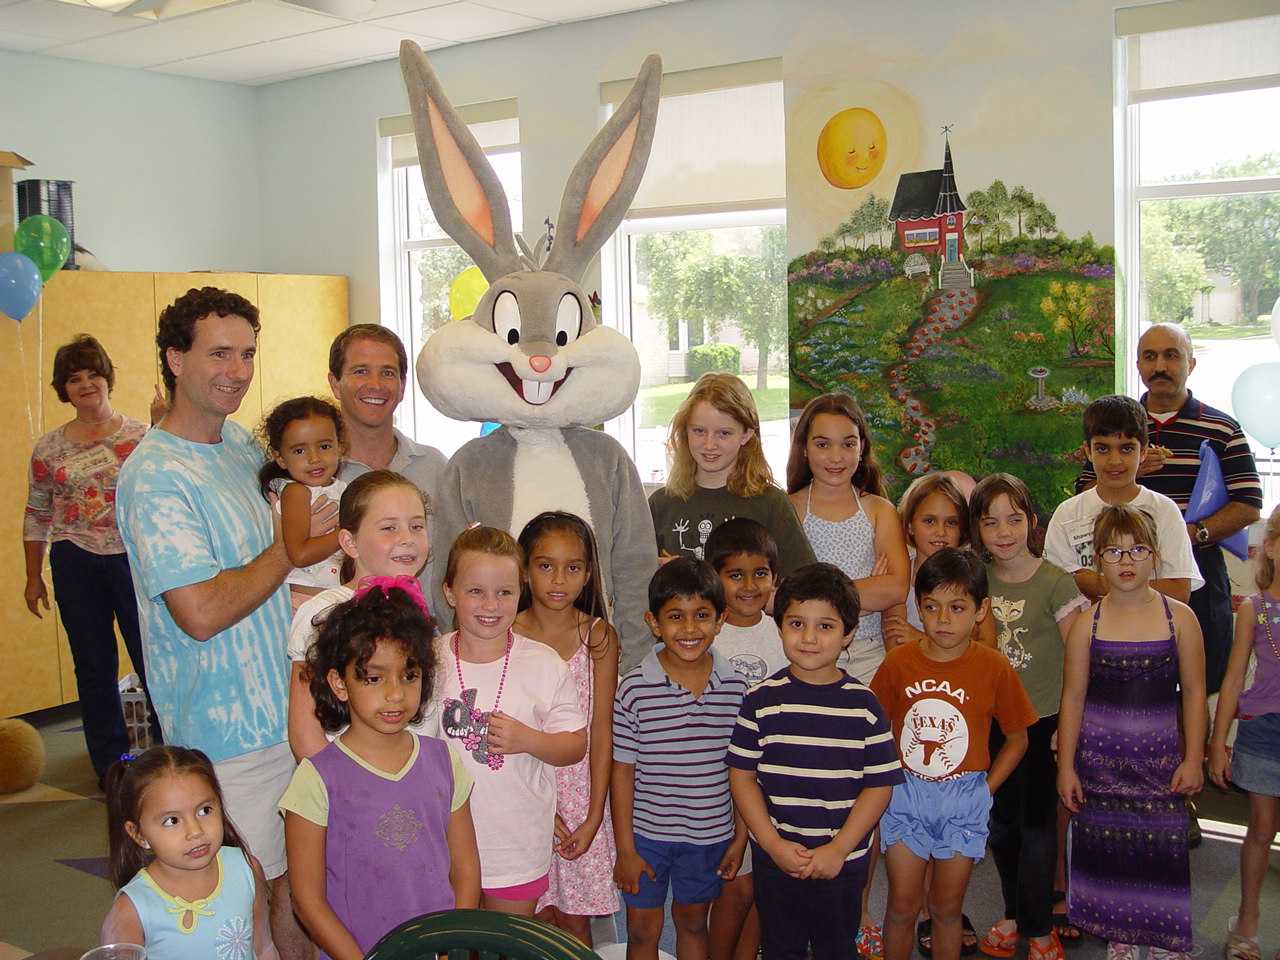 A visit from Bugs Bunny